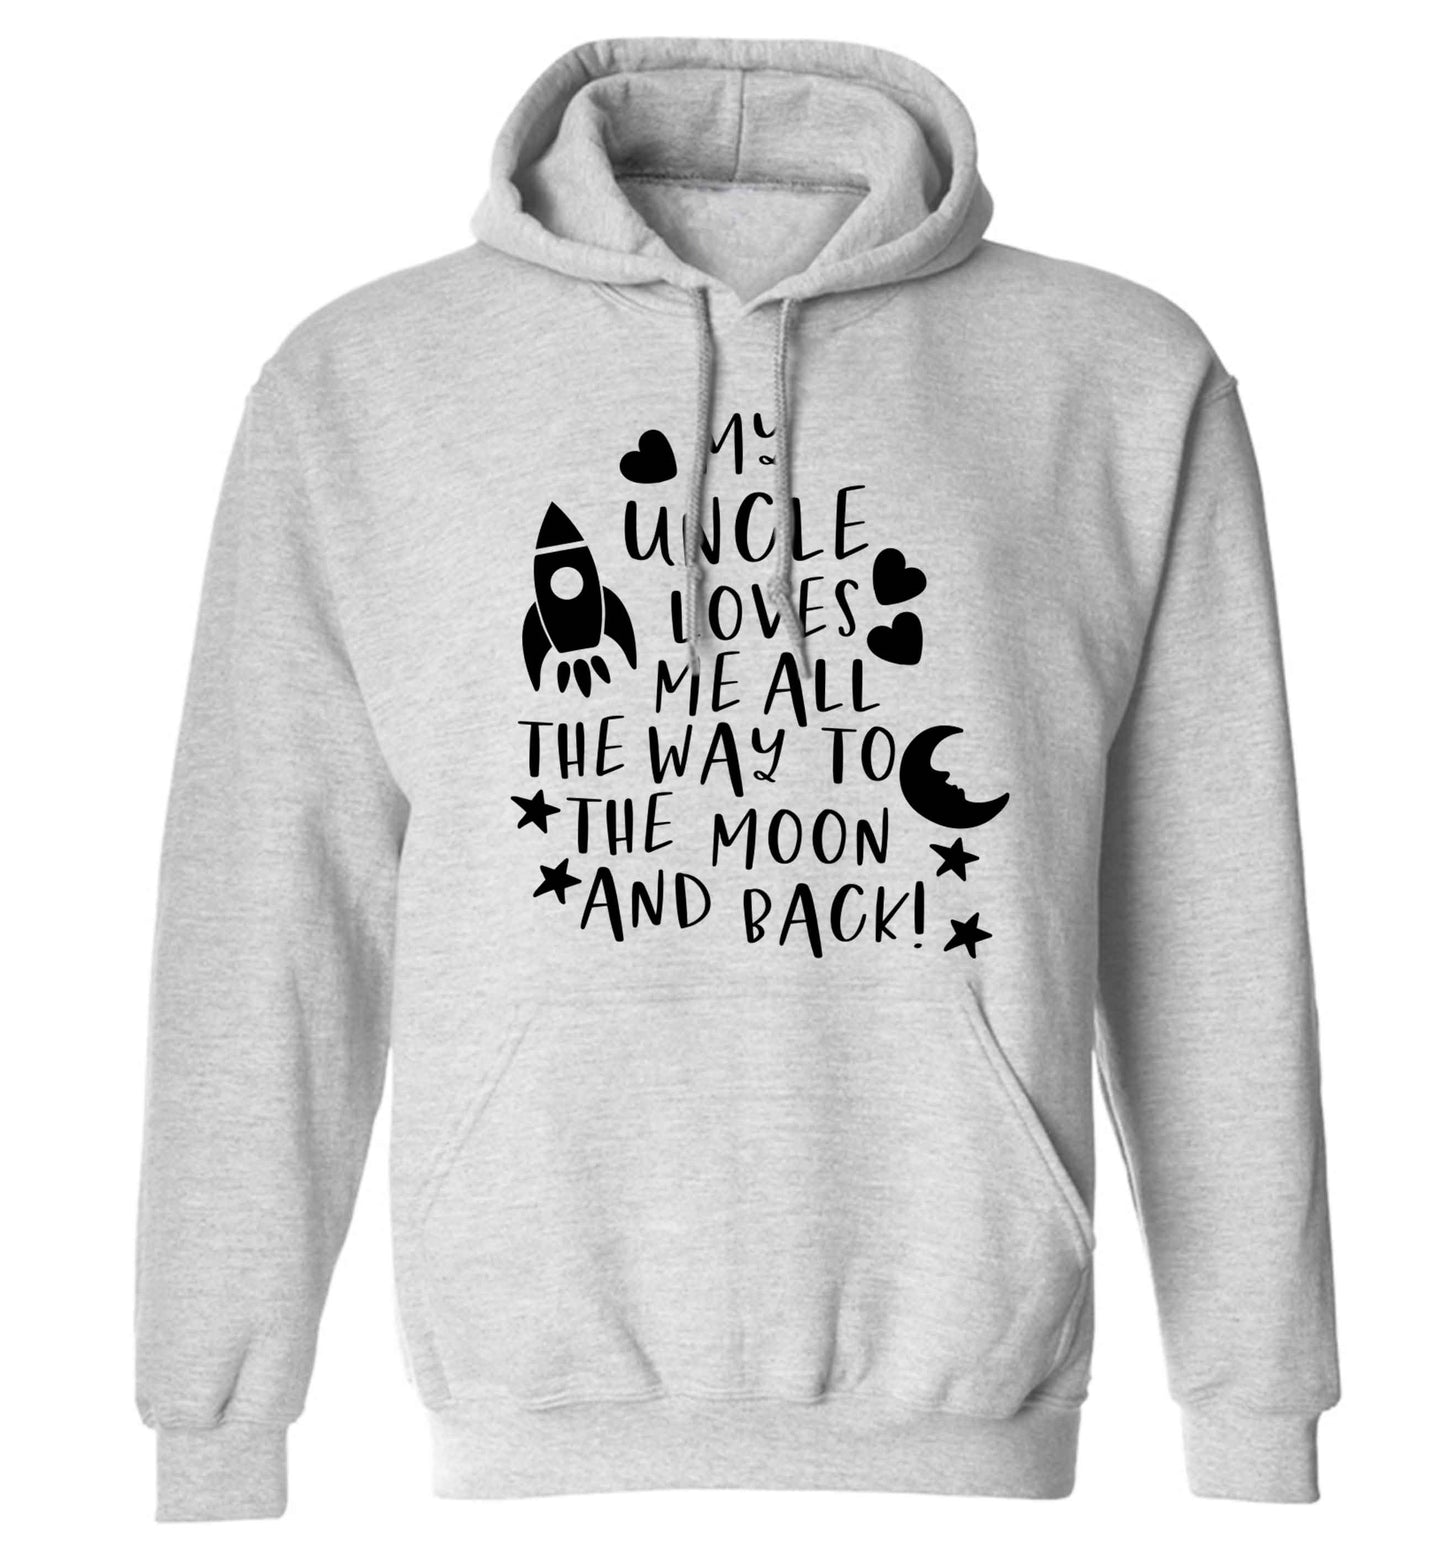 My uncle loves me all the way to the moon and back adults unisex grey hoodie 2XL